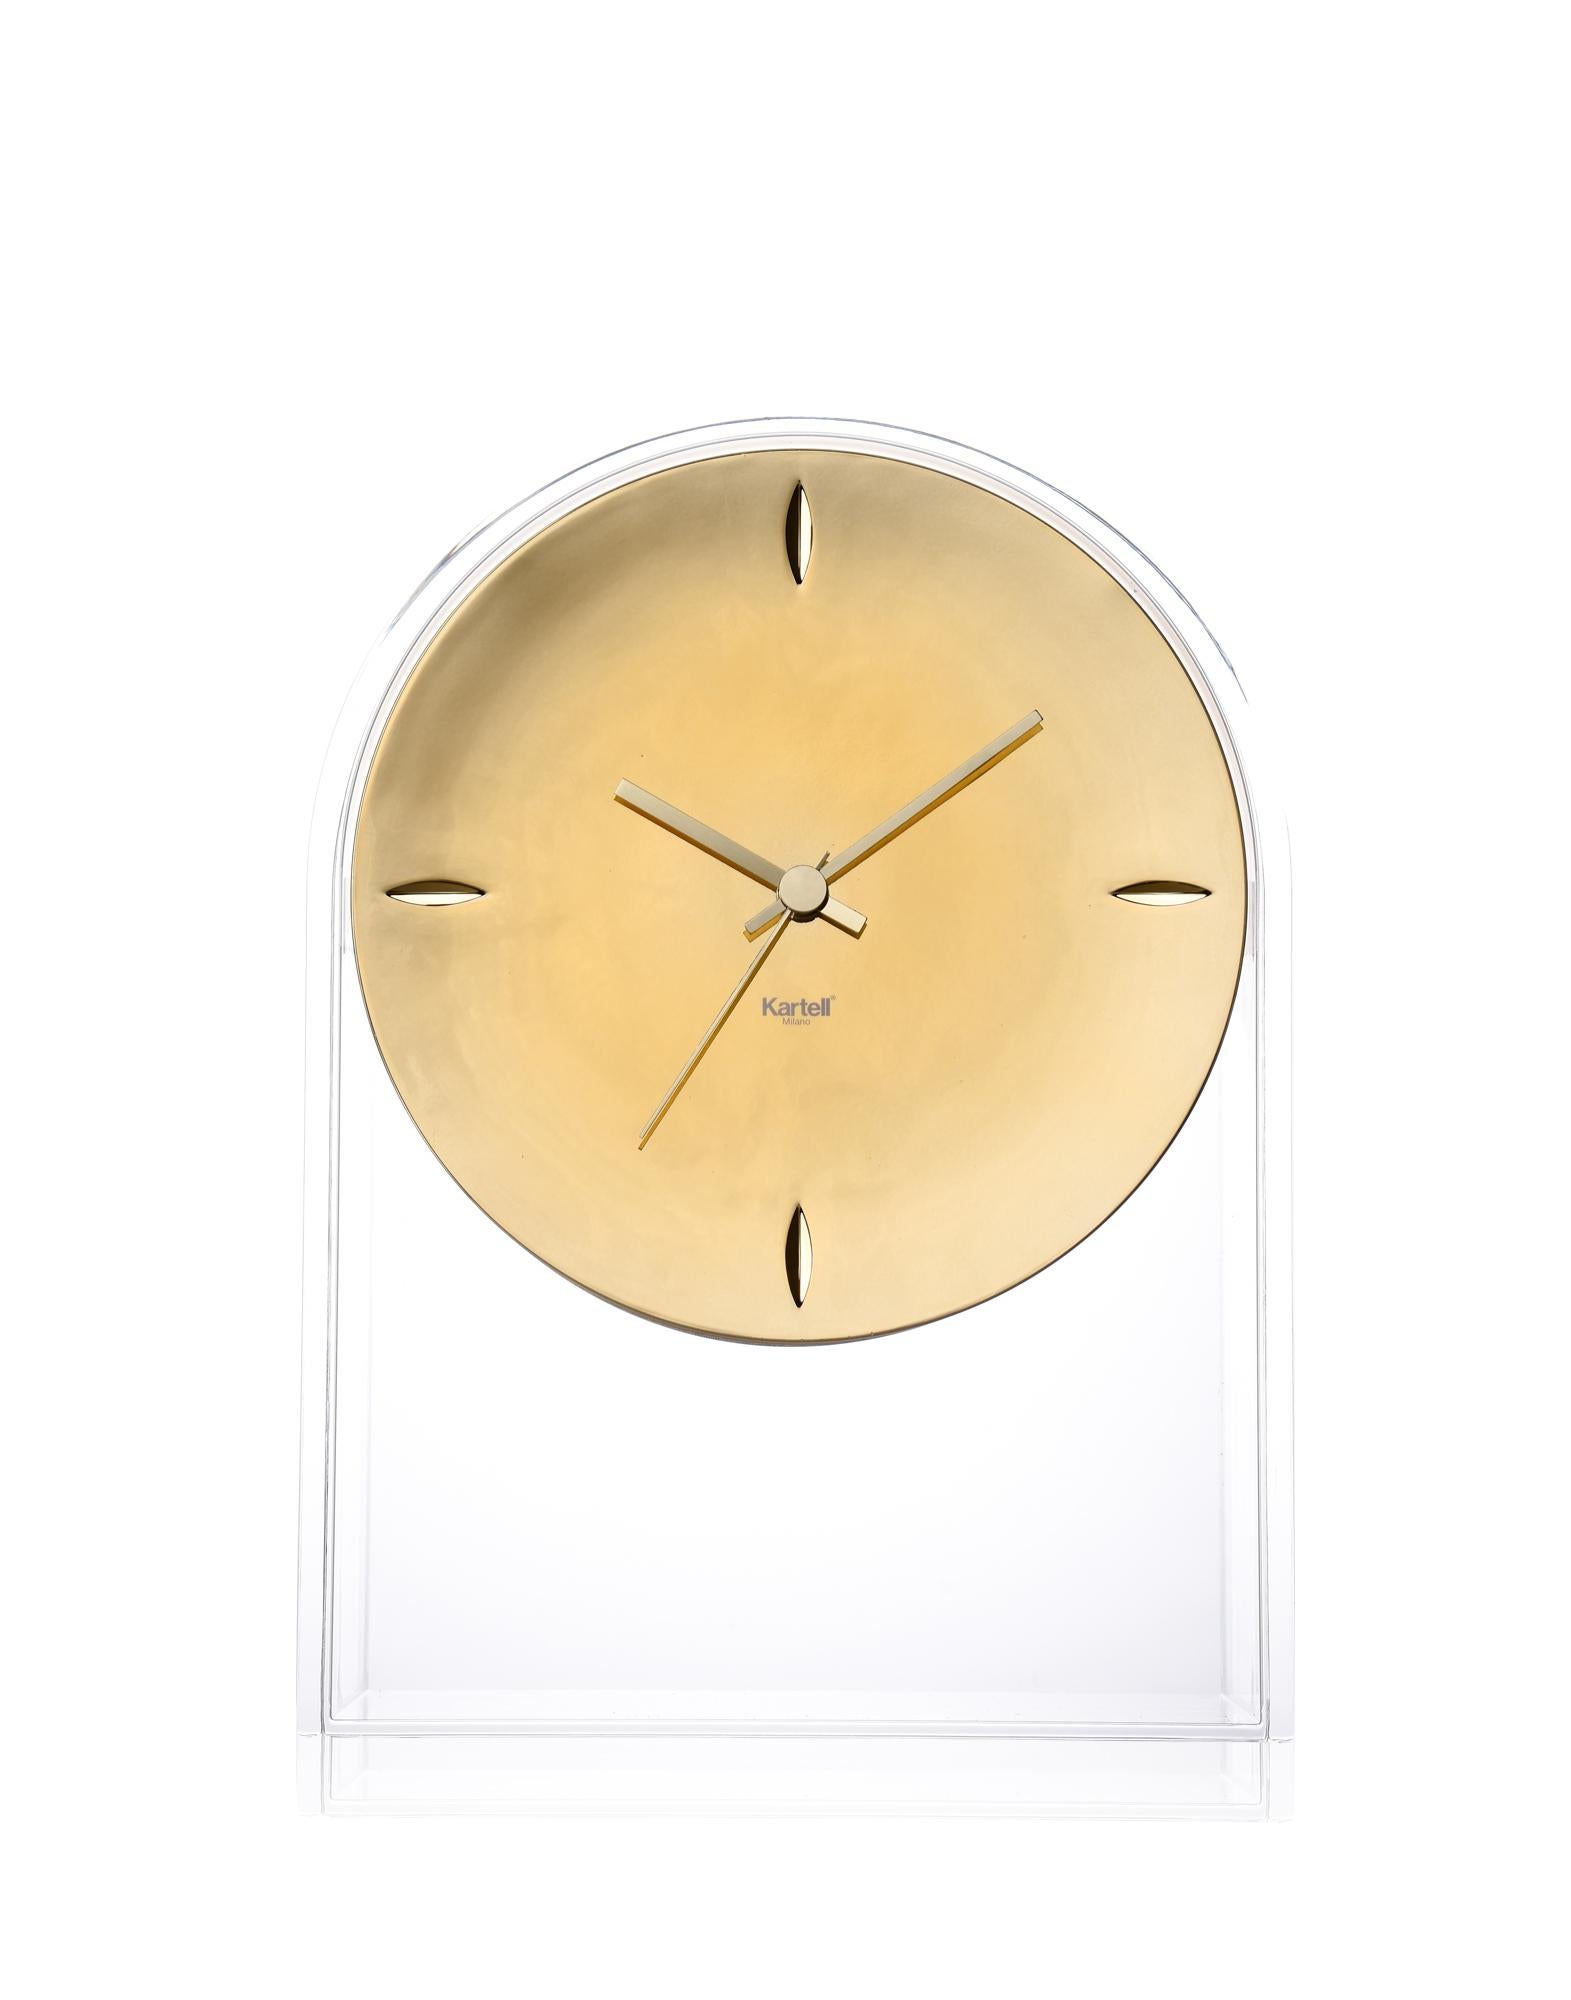 Italian Kartell AIR DU TEMPS Table Clock in Black by Eugeni Quitllet For Sale